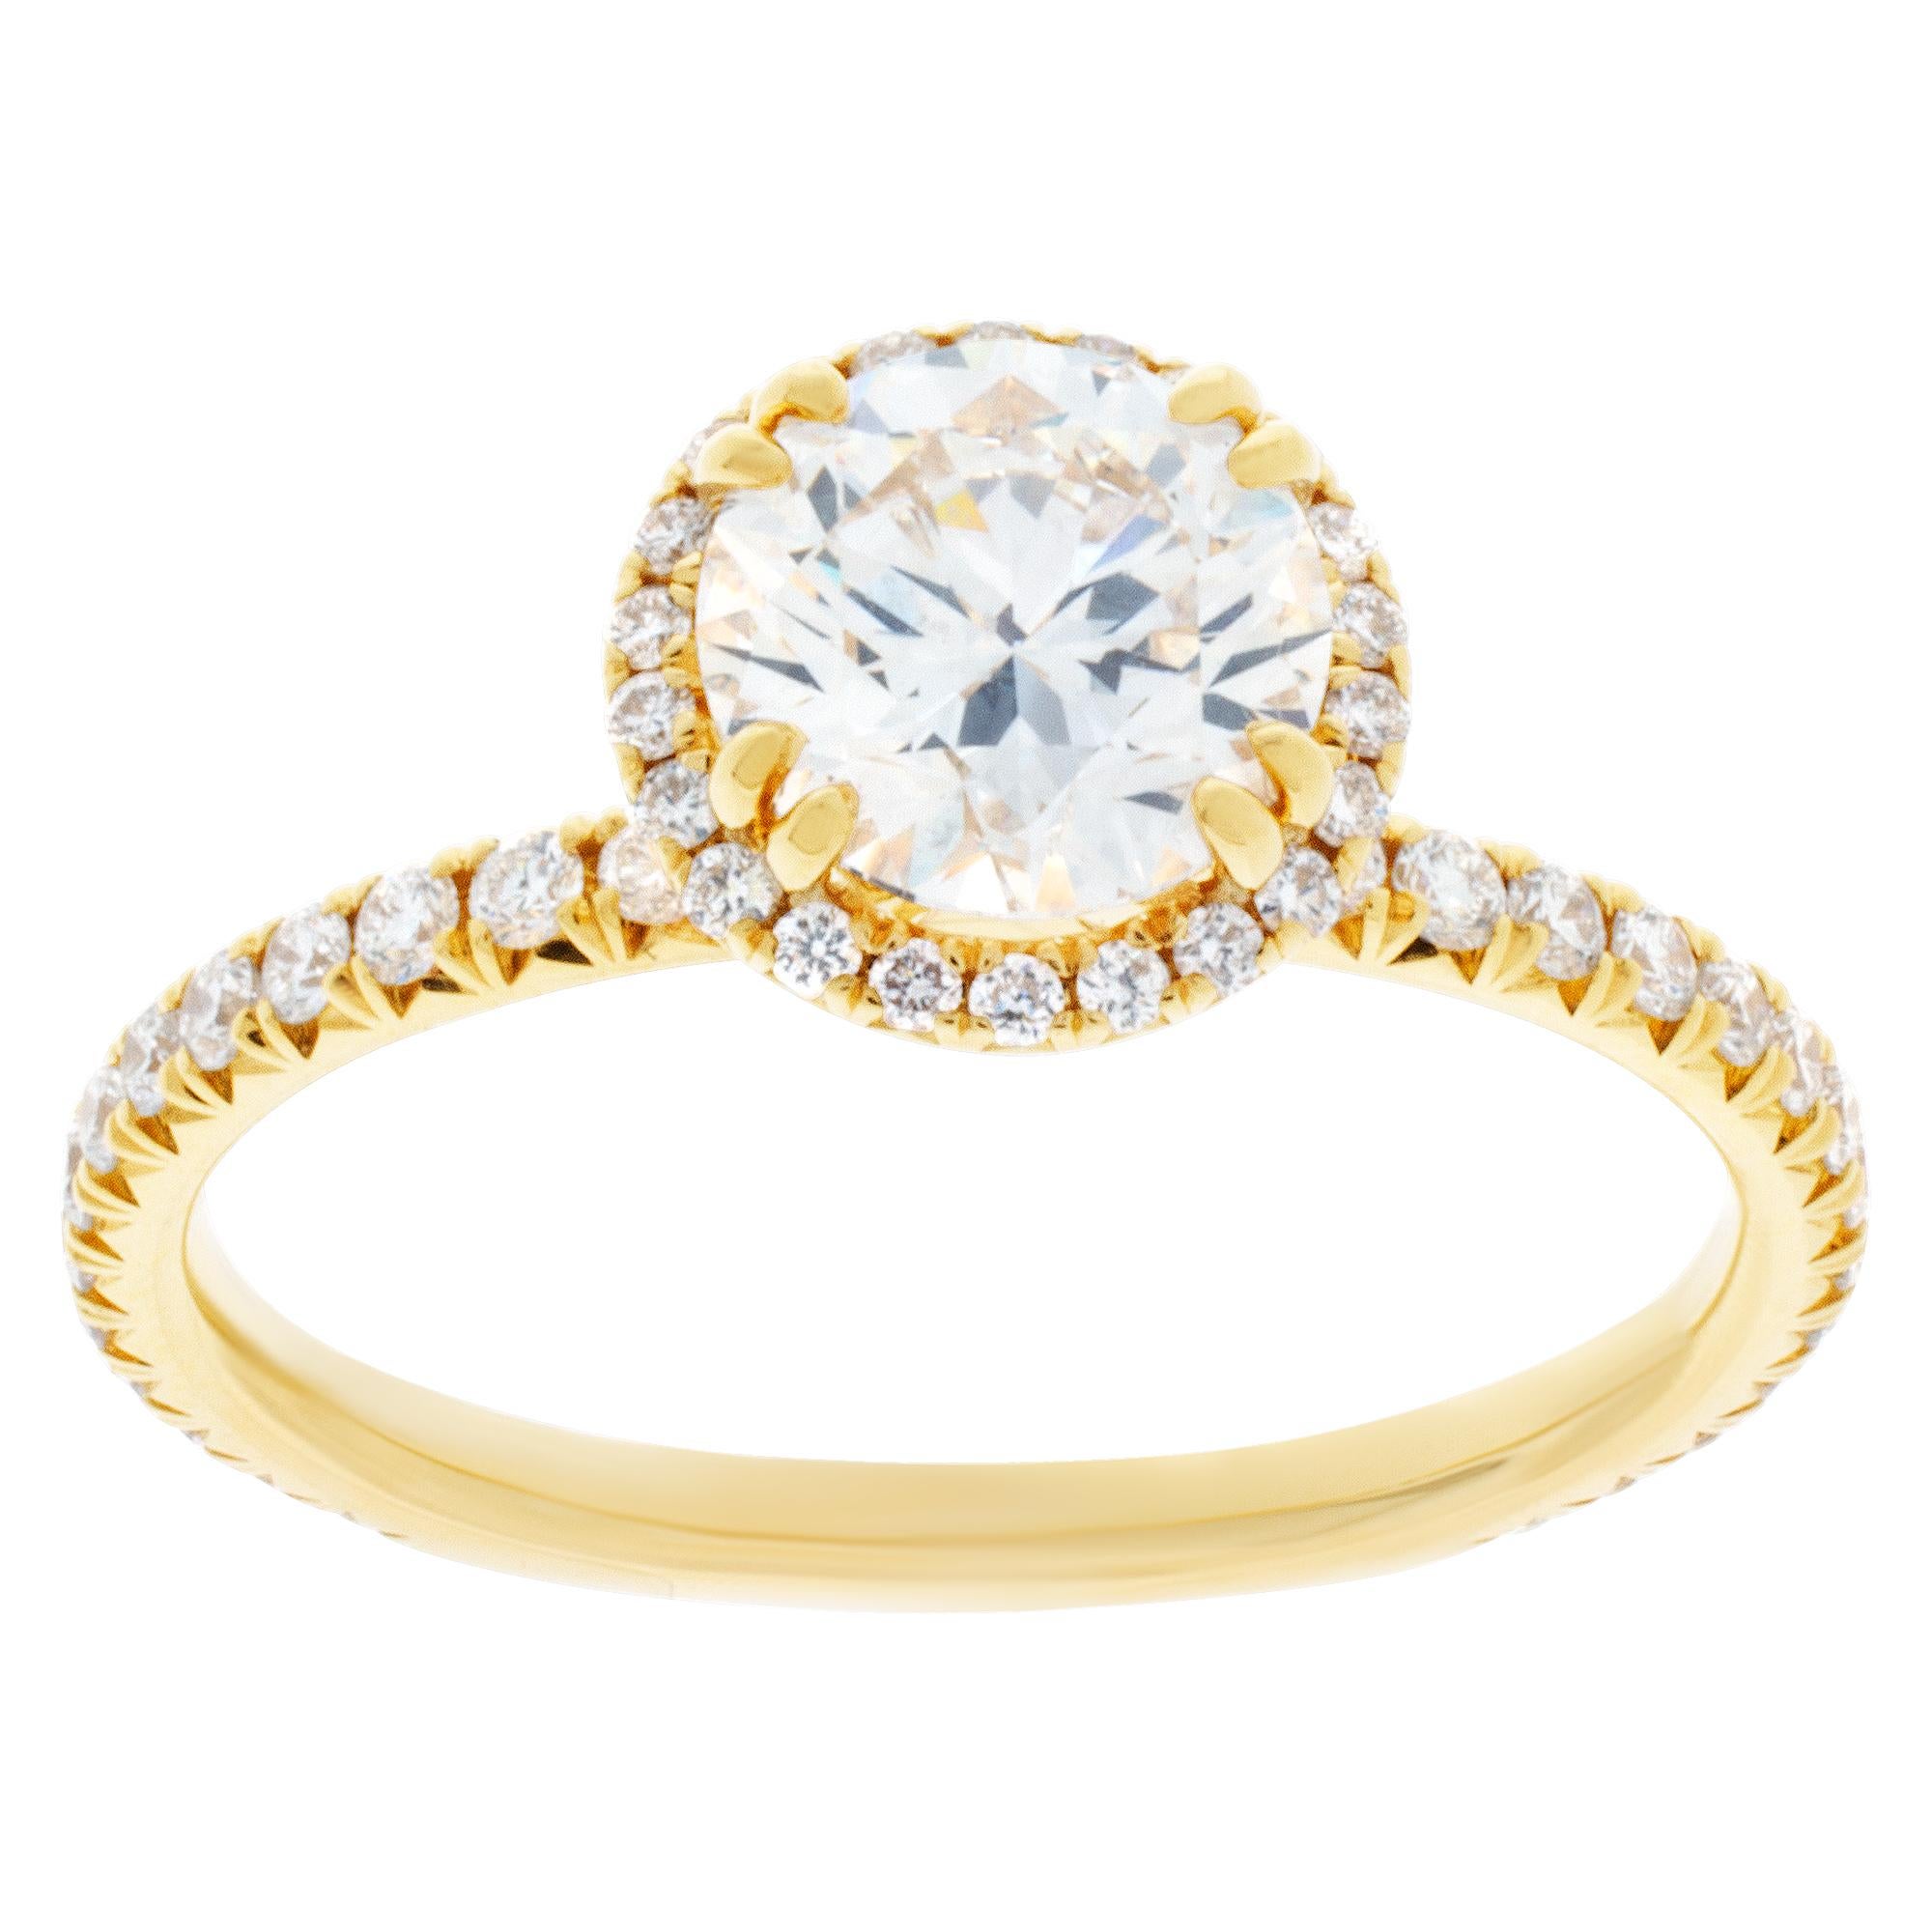 Round Cut GIA Certified Diamond Round Brilliant Cut 1.06 Carat Ring Set in 18k Yellow Gold For Sale